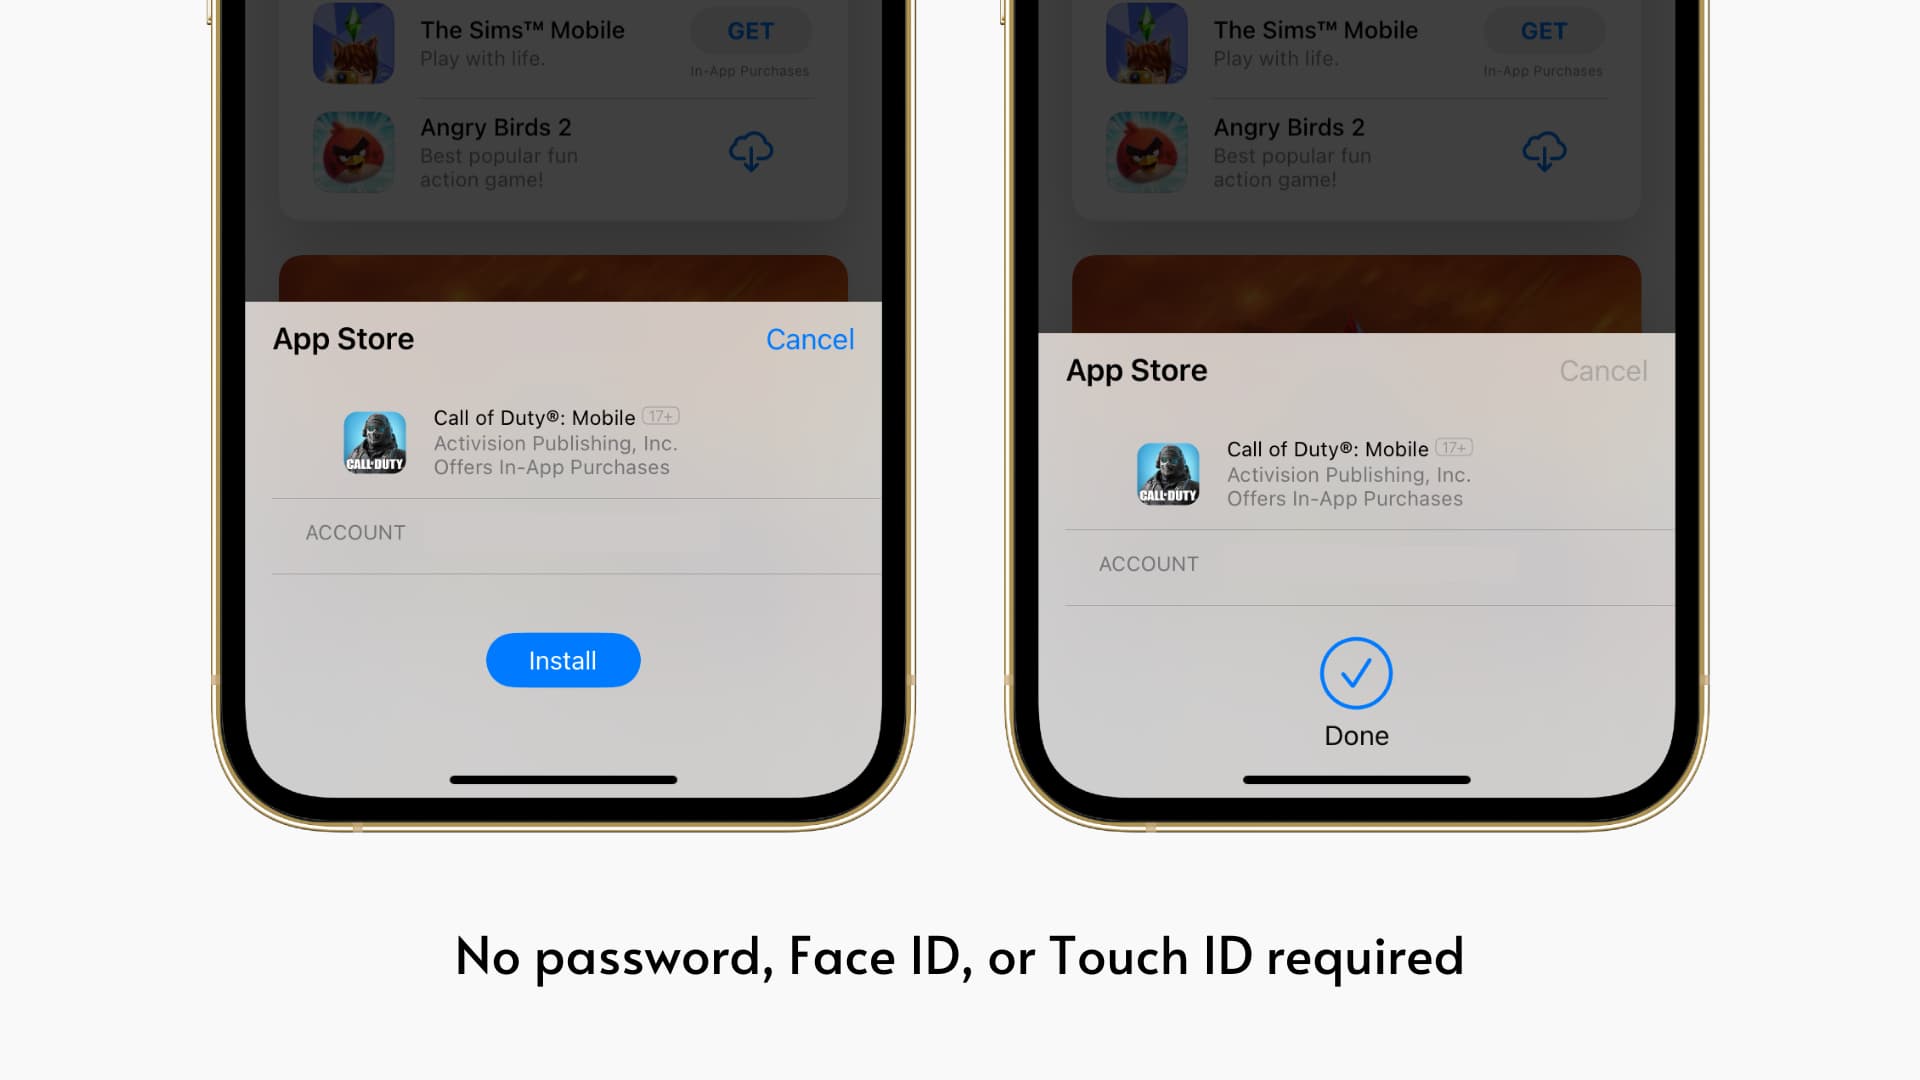 Download iPhone apps without Face ID or password